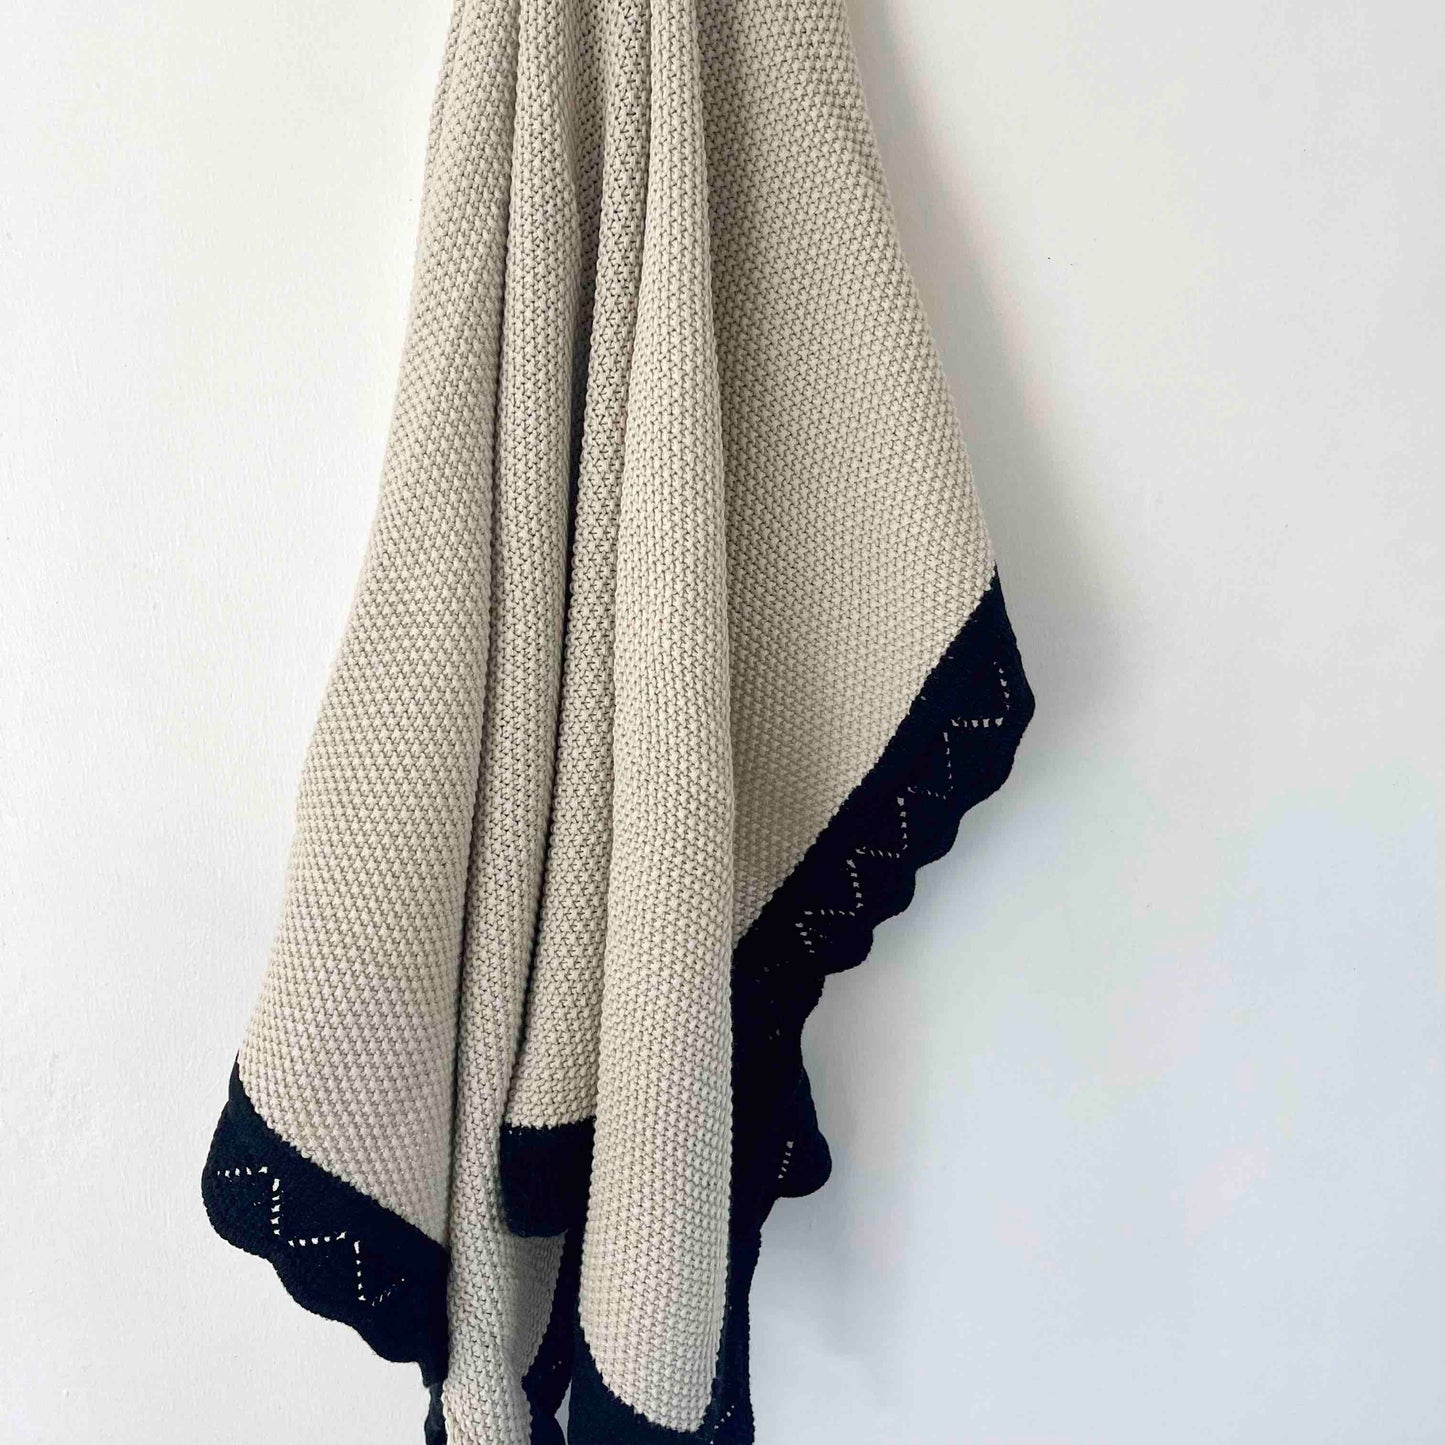 Scalloped Edge Knitted Blanket - Beige and Black